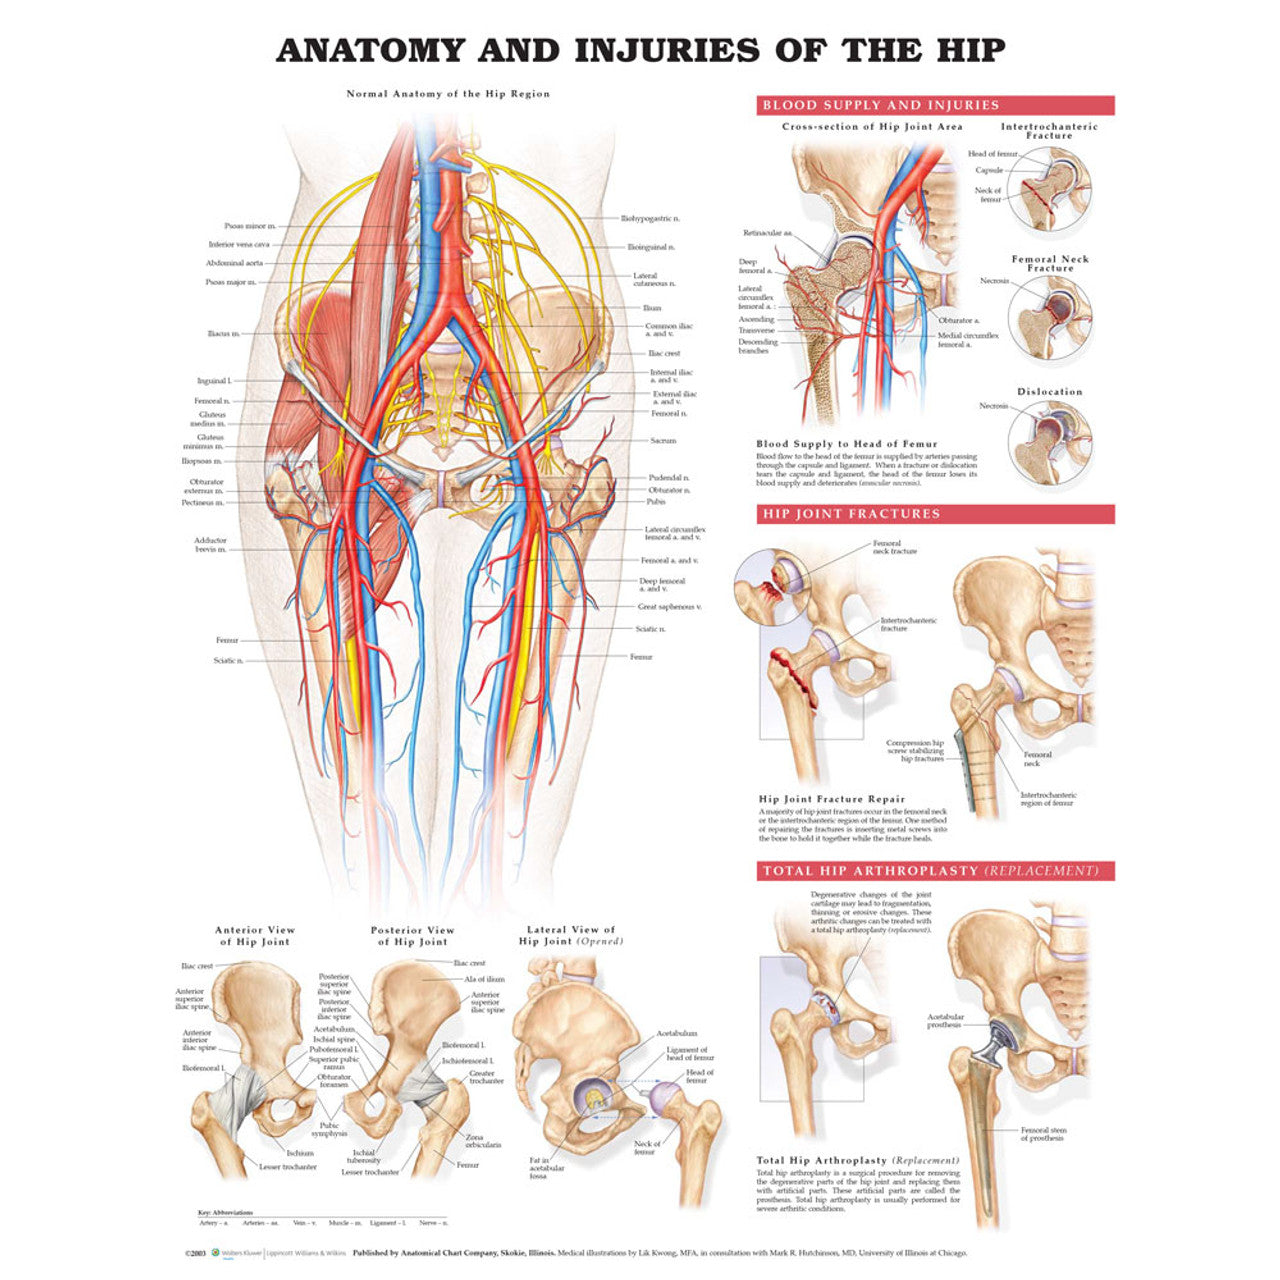 Anatomy and Injuries of the Hip (Laminated) - physio supplies canada